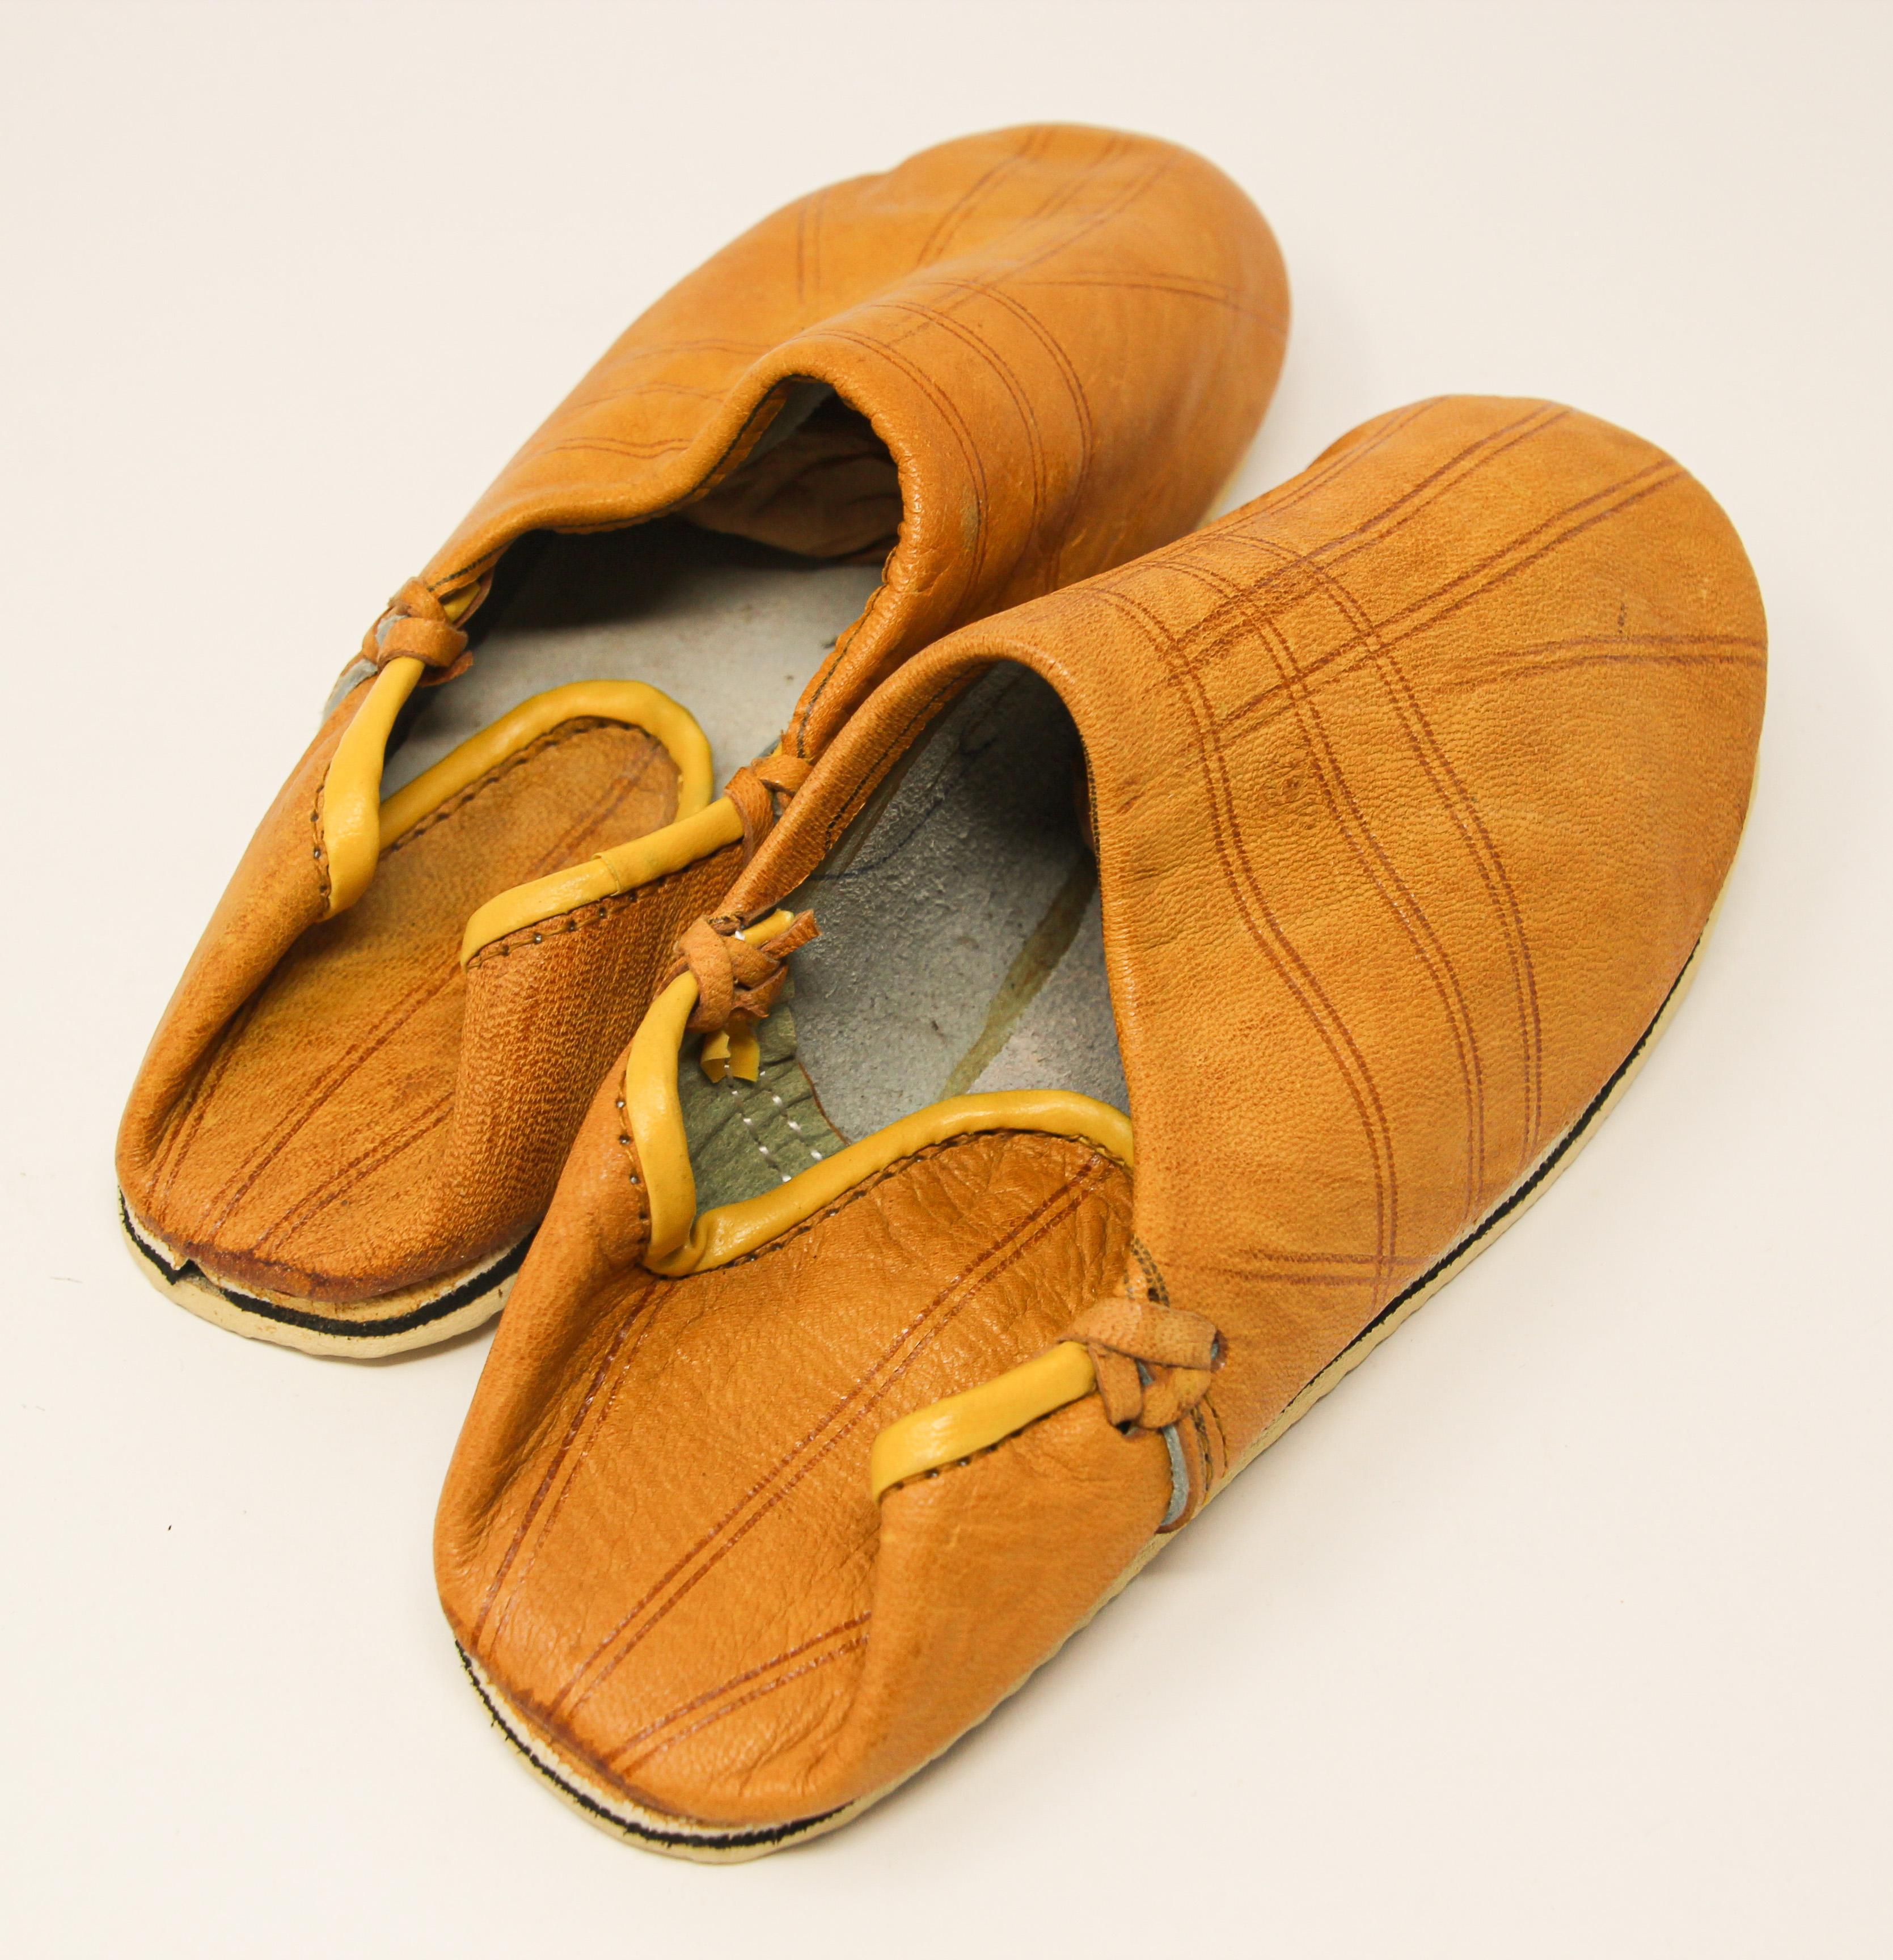 Moroccan leather ethnic yellow slippers are handmade.
Handcrafted in Fez Morocco.
You won't want to take the Moroccan babouches off your feet.
Moroccan shoes to wear around the pool or at the beach just in time for Summer.
Measurements.
Sole is 9.5